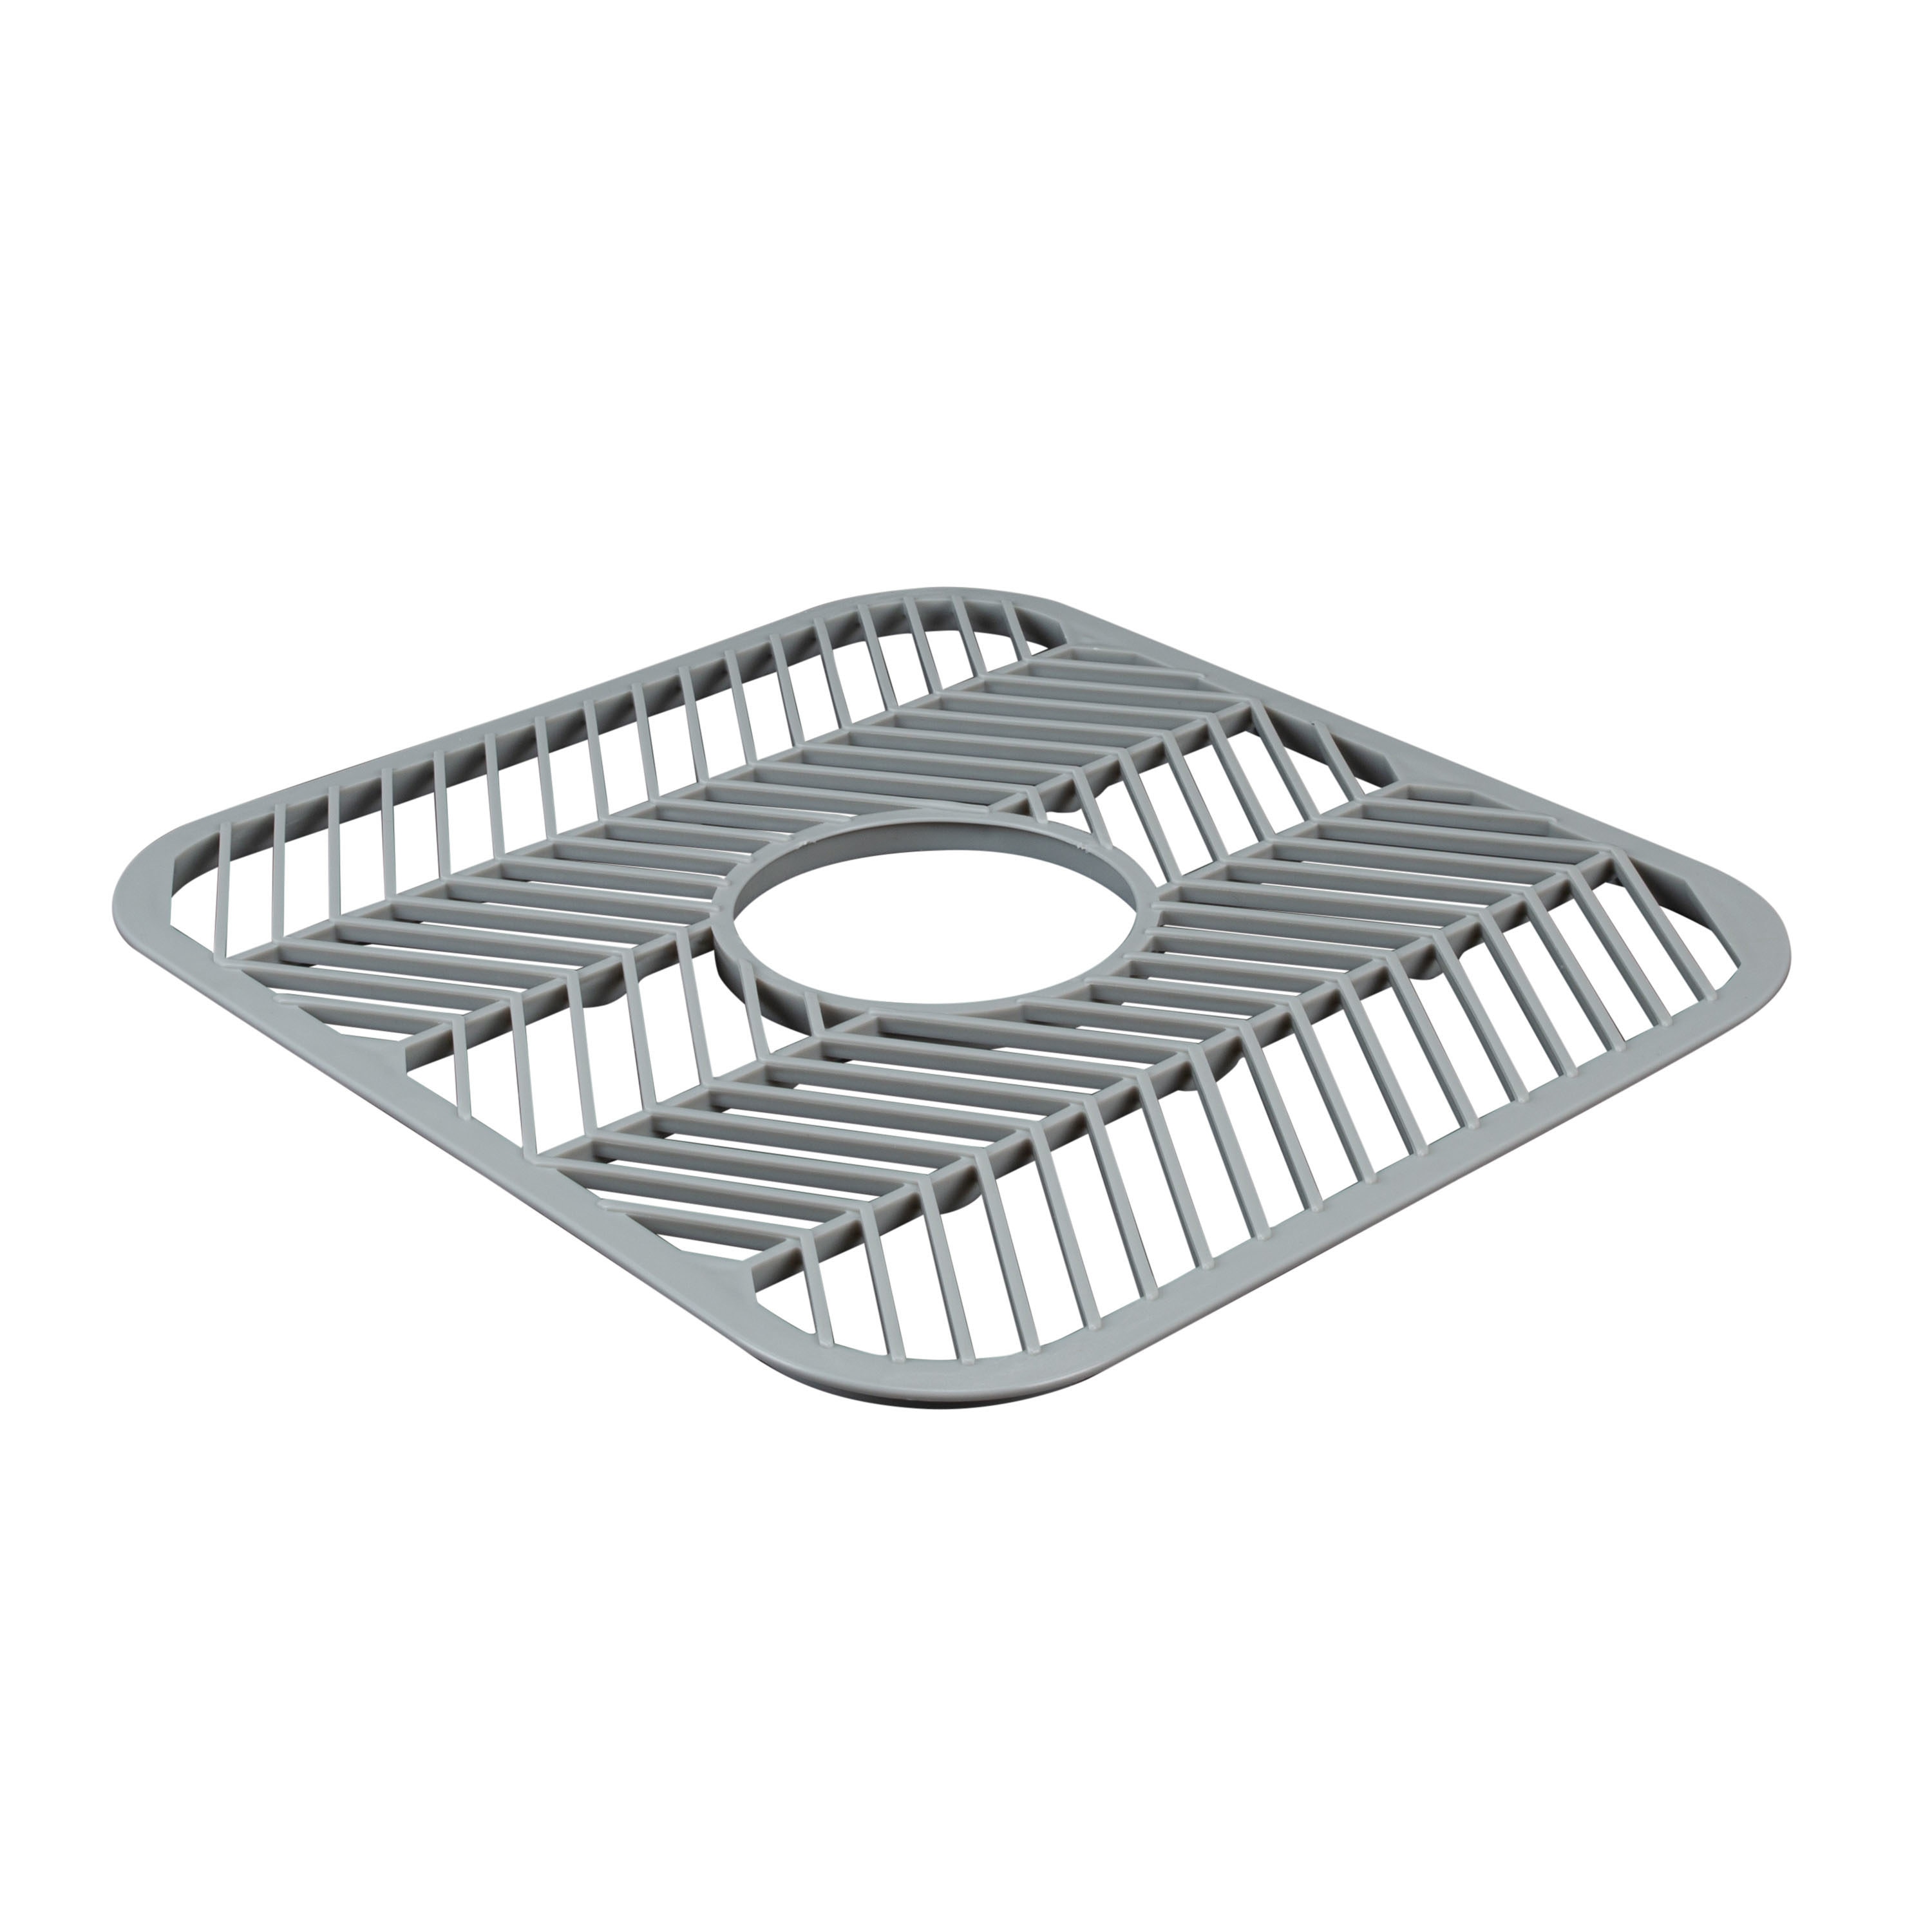 Rubbermaid Clear Sink Protector